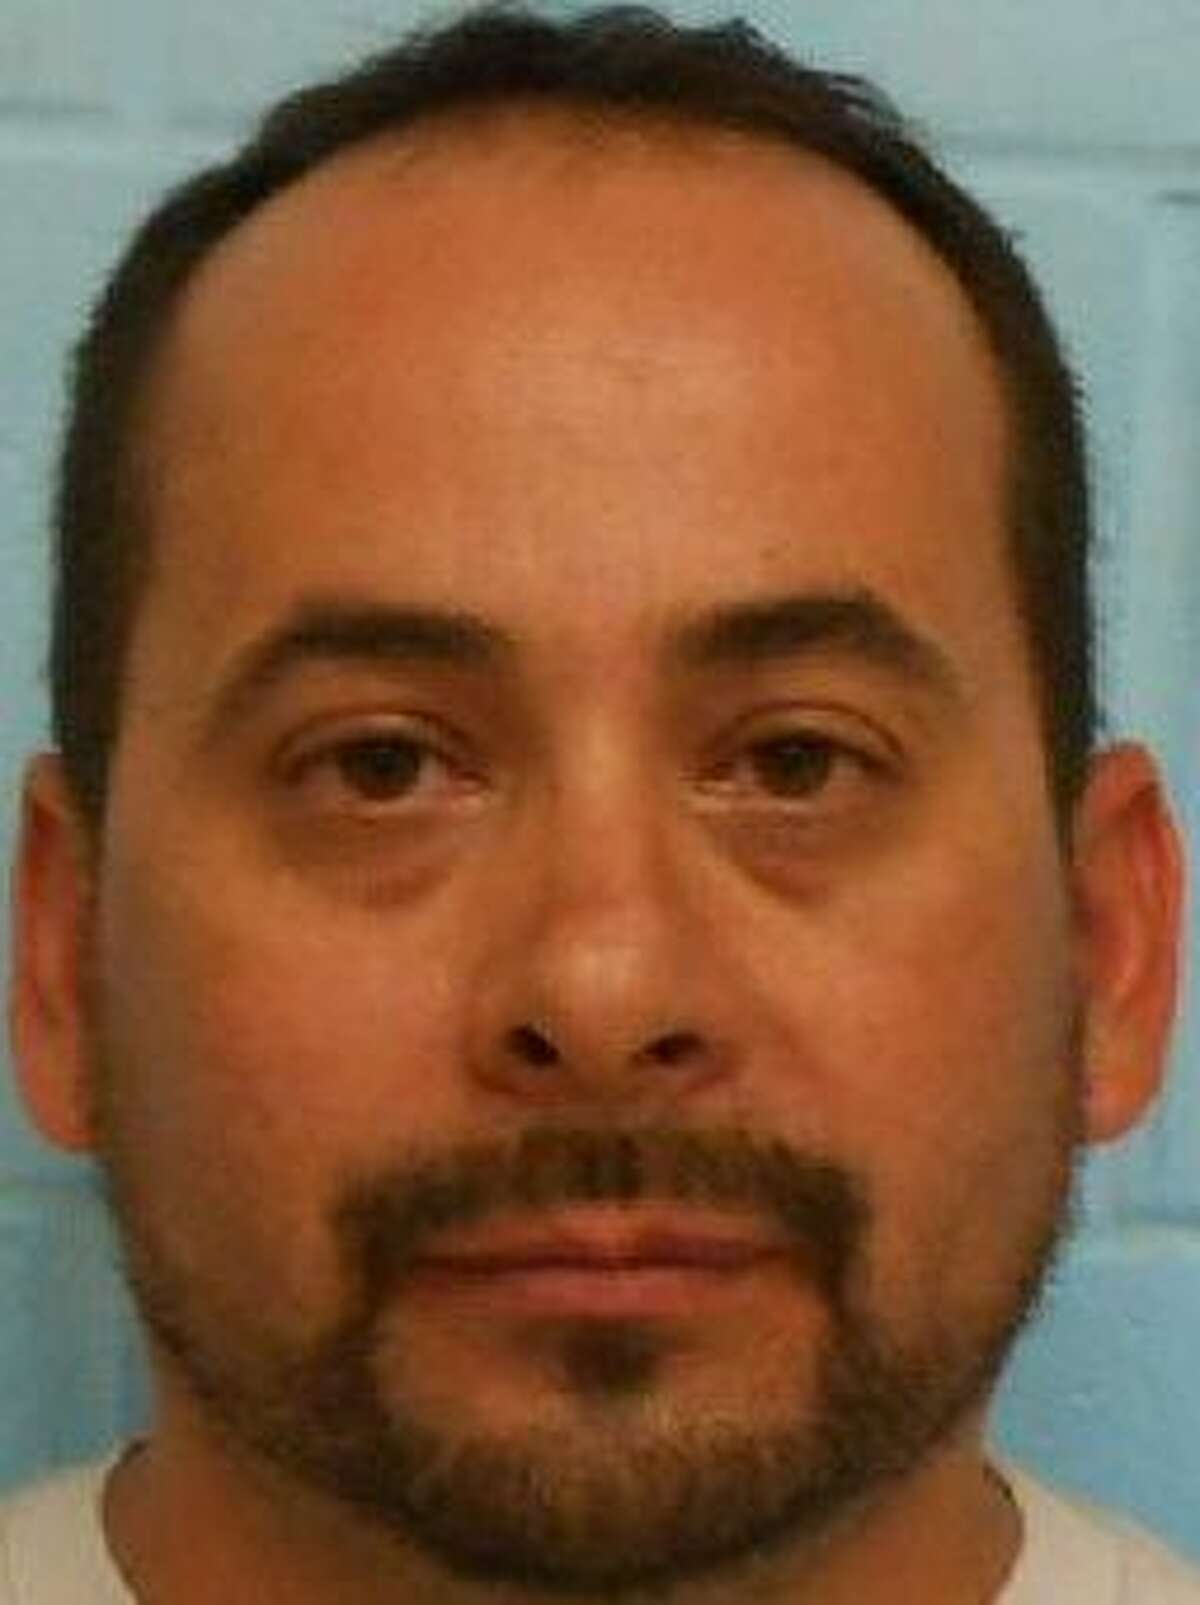 Ramon Garcia is accused of having a fistfight with Ambrosio Limon, police commander for Donna Independent School District in South Texas, at a softball game on Saturday at a park in McAllen. Both men have been charged with disorderly conduct, a Class C misdemeanor punishable by a fine of up to $500.